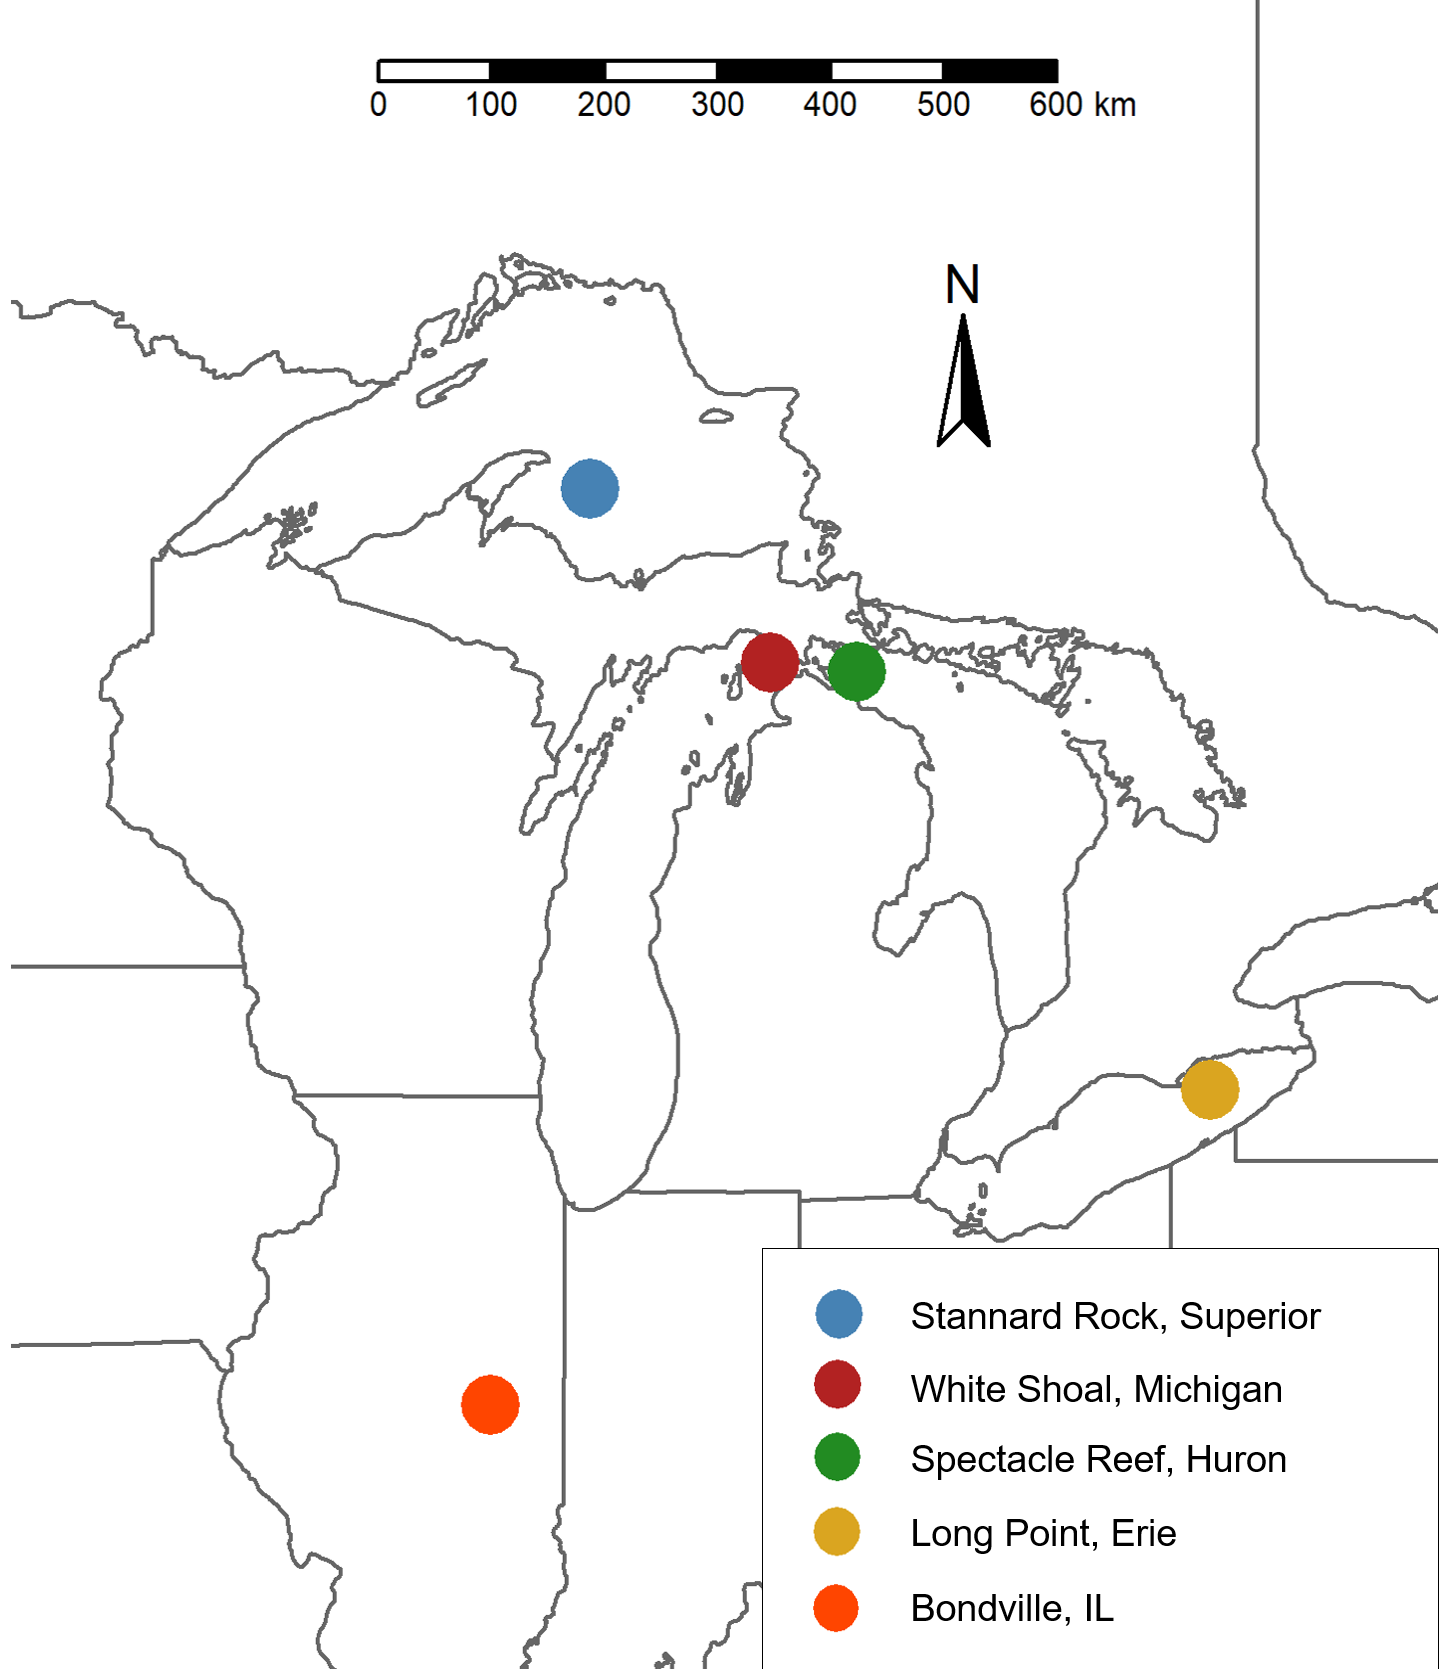 A map of the Great Lakes region, with the locations of the four Great Lakes Evaporation Network monitoring stations on each of the lakes, as well as the Bondeville station in Illinois.